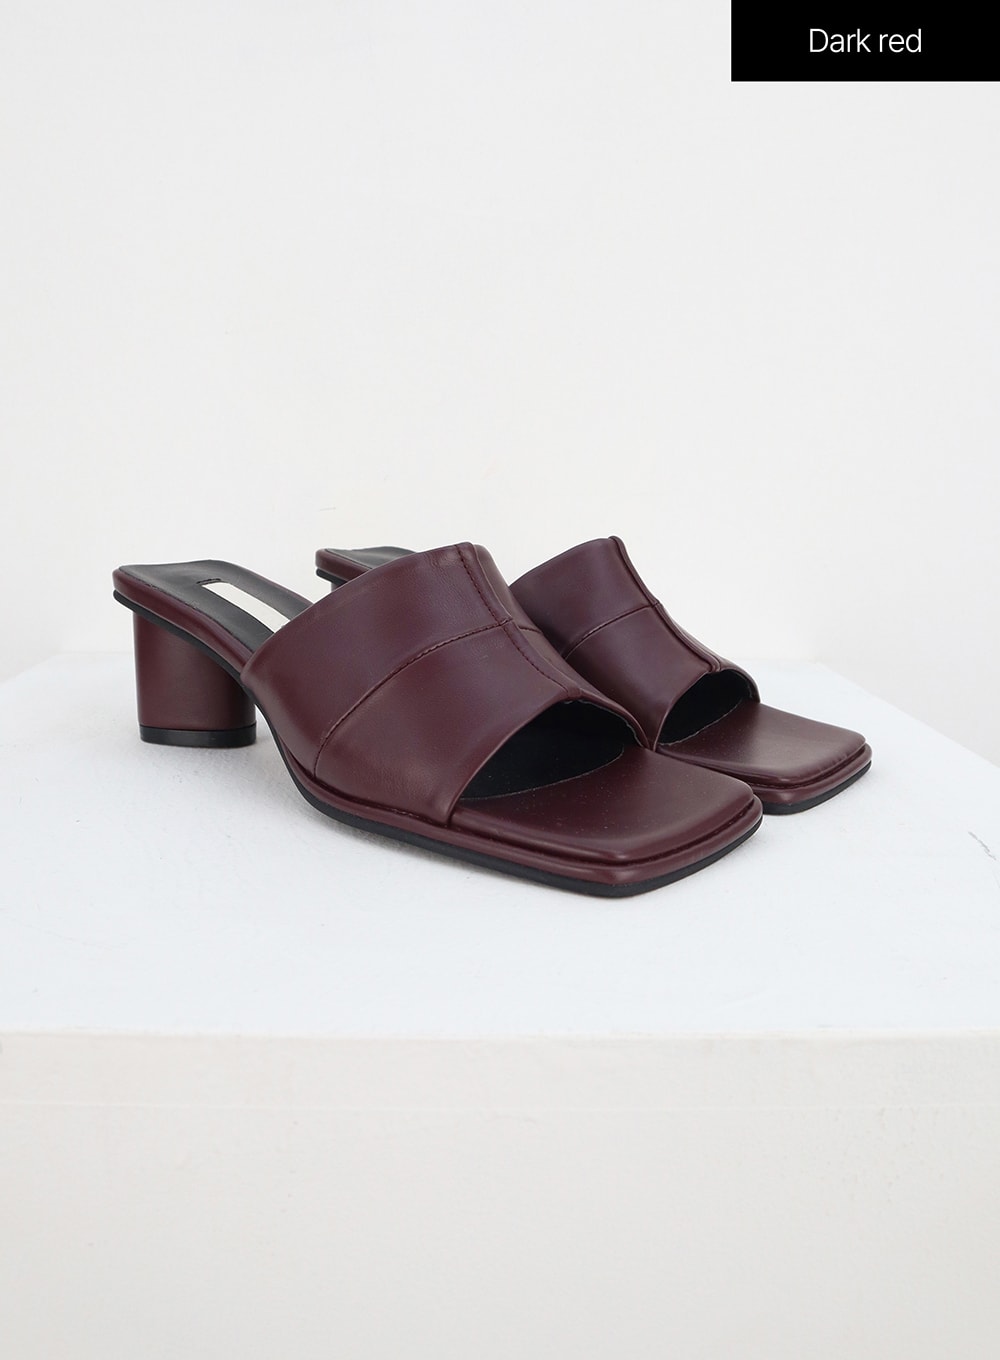 square-open-toe-mules-iy331